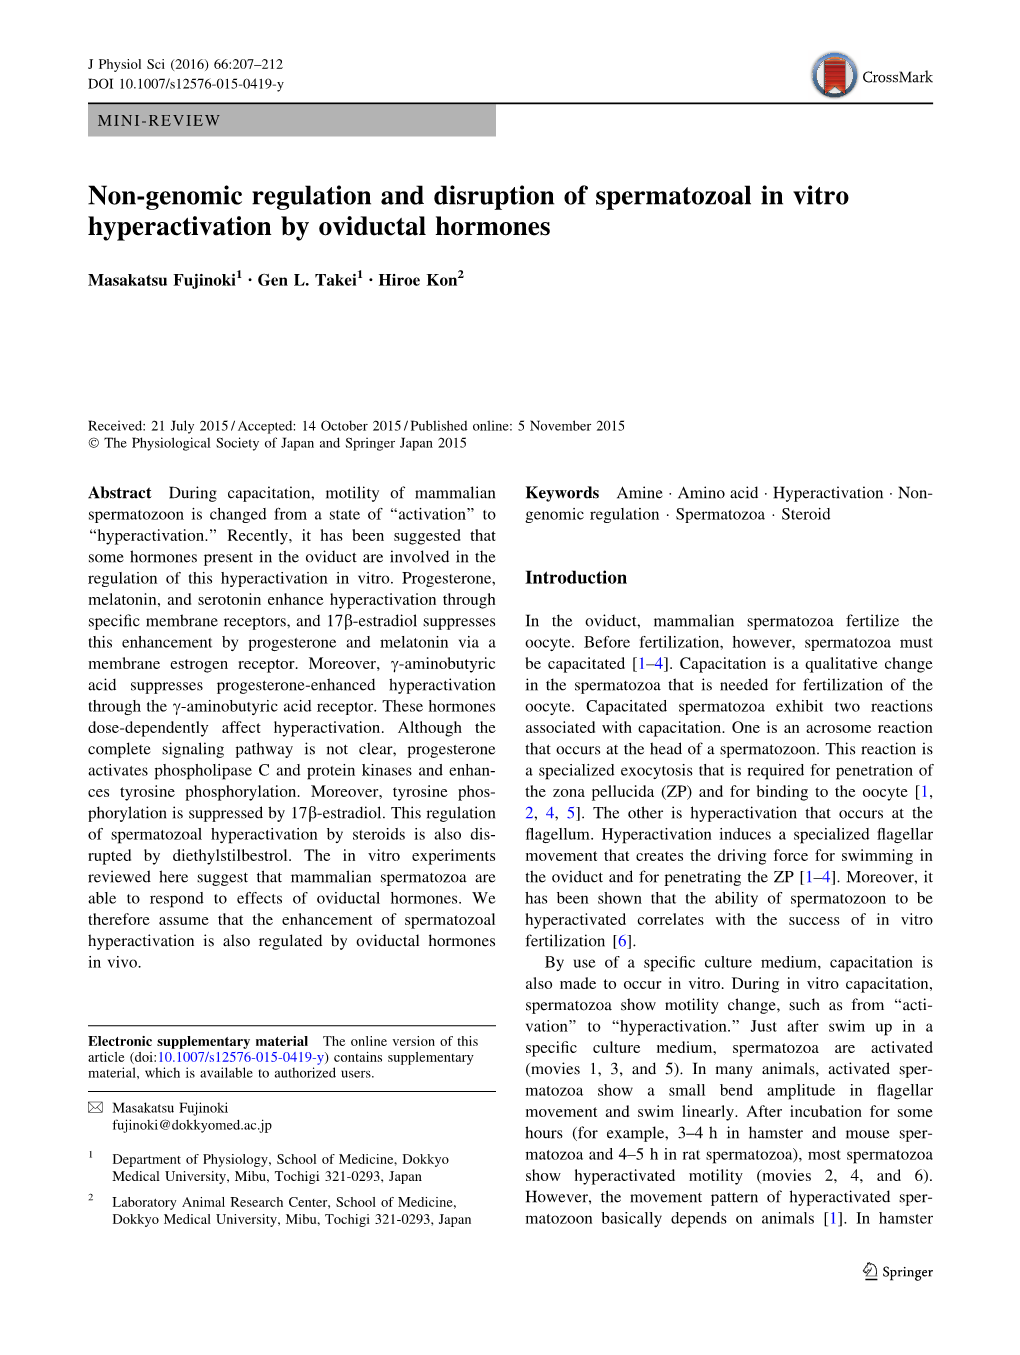 Non-Genomic Regulation and Disruption of Spermatozoal in Vitro Hyperactivation by Oviductal Hormones